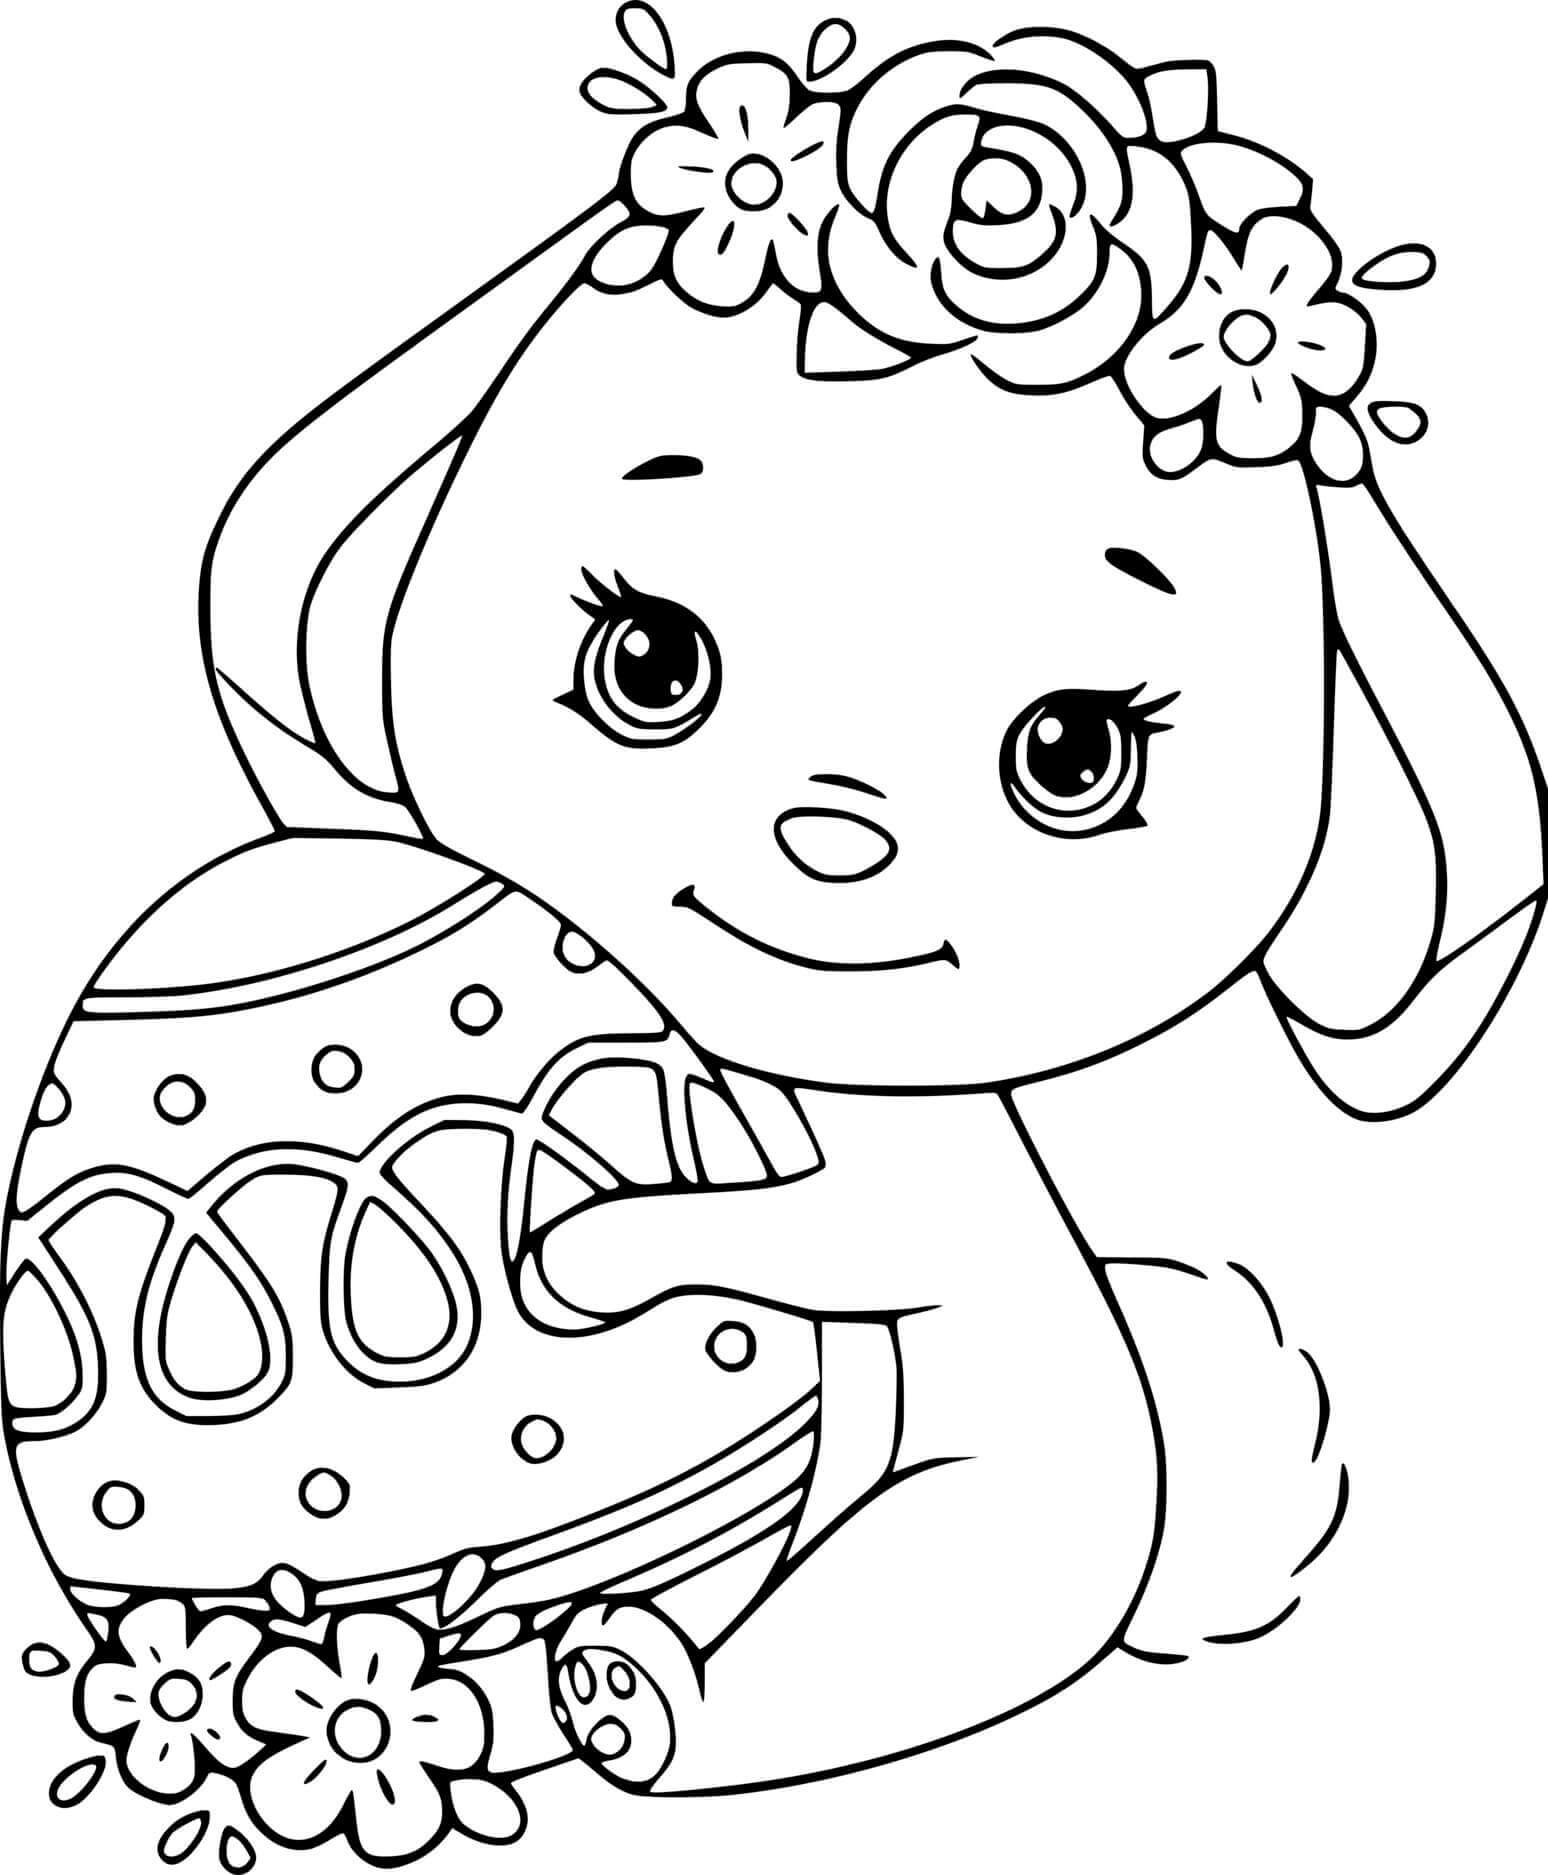 Baby Bunny And A Big Egg Coloring Page